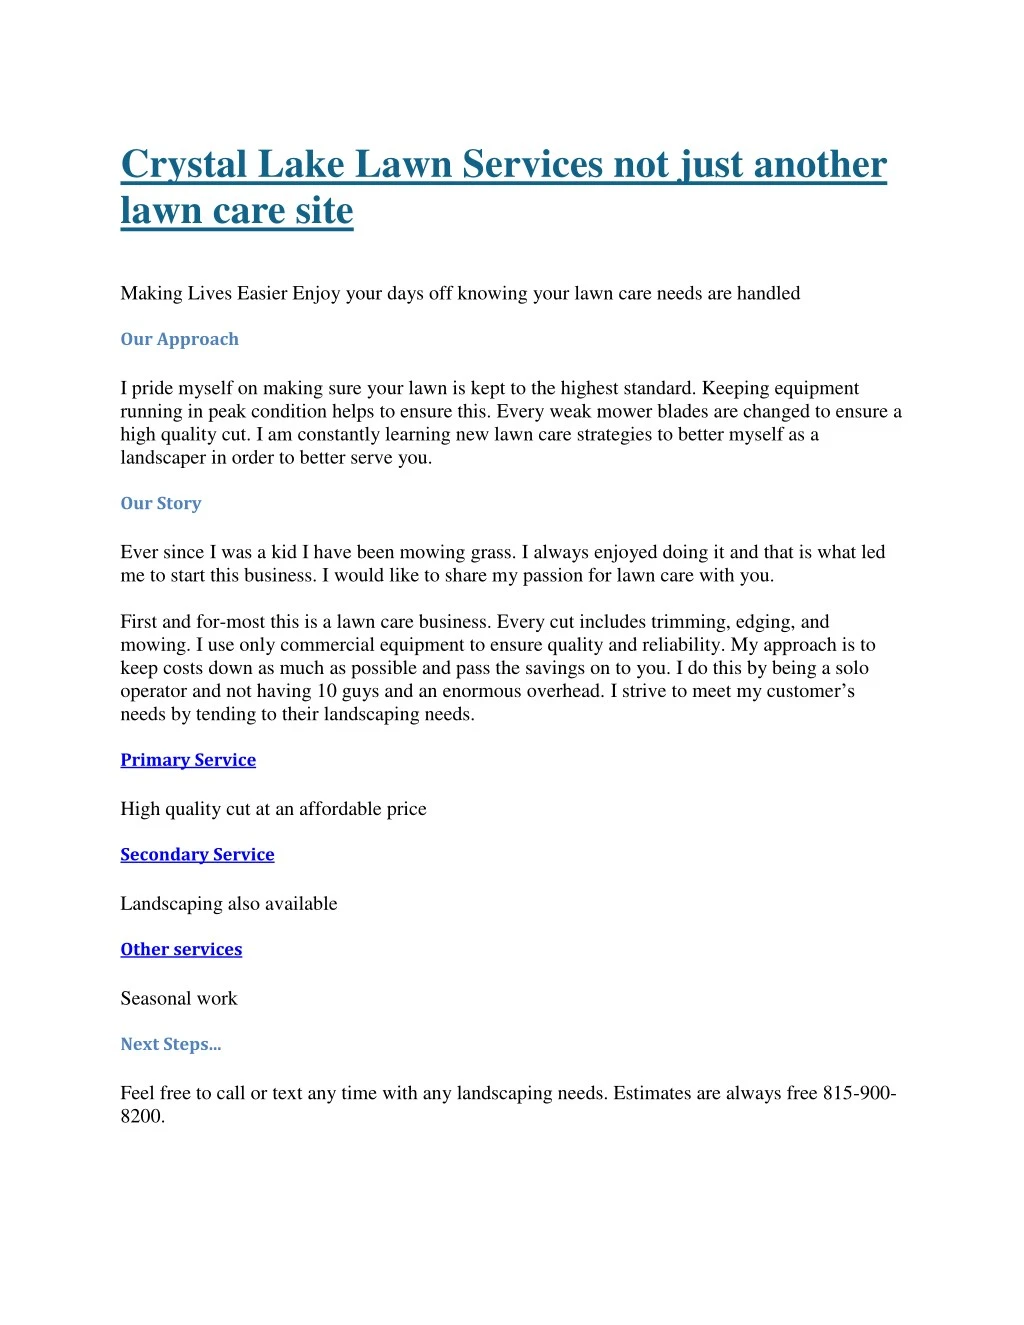 crystal lake lawn services not just another lawn